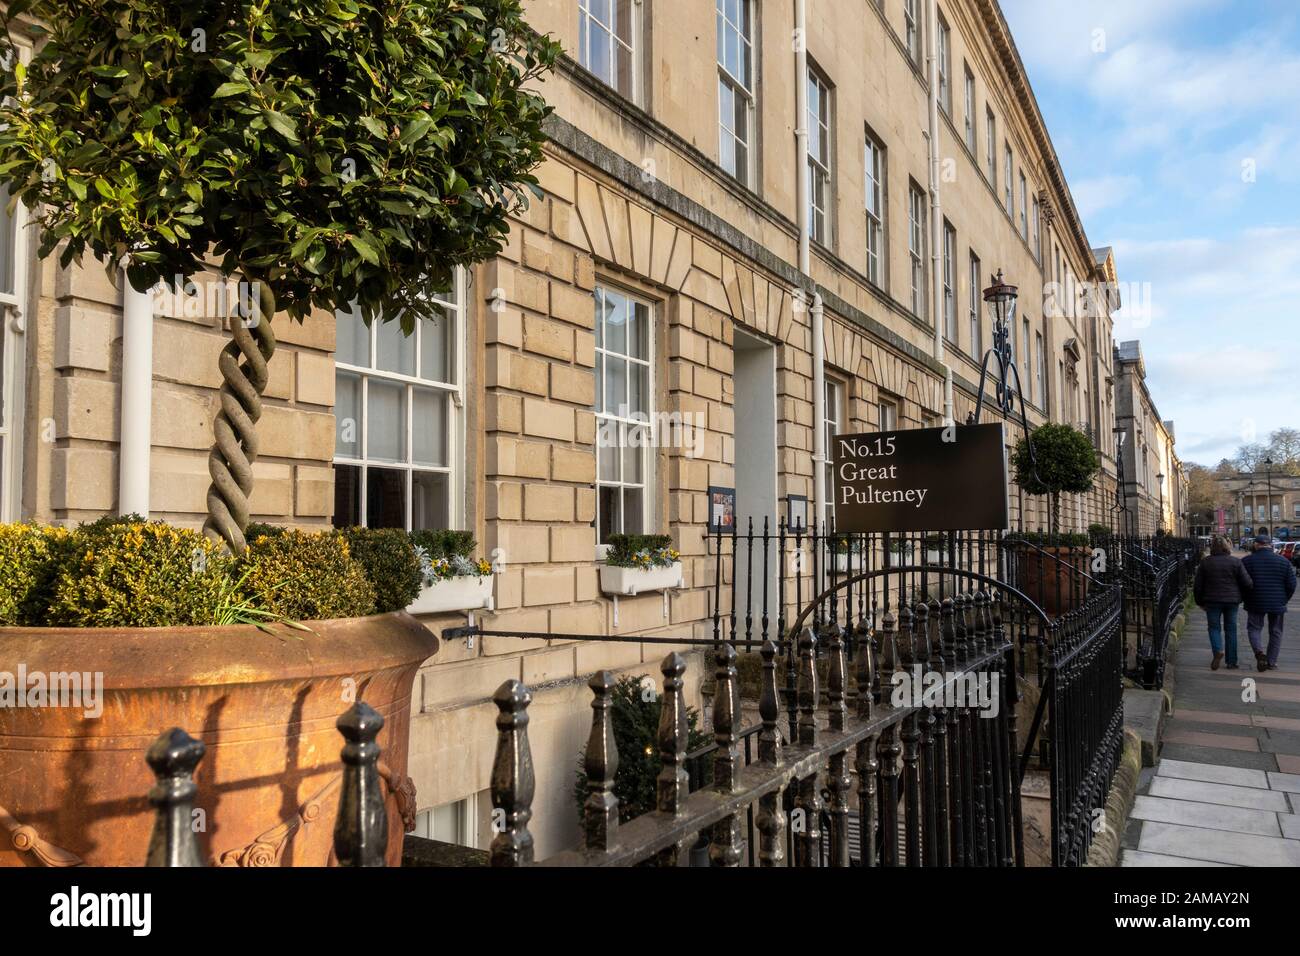 No.15 Great Pulteney Street Boutique Hotel & Spa, Great Pulteney Street, Bath, Somerset, England, UK Stock Photo